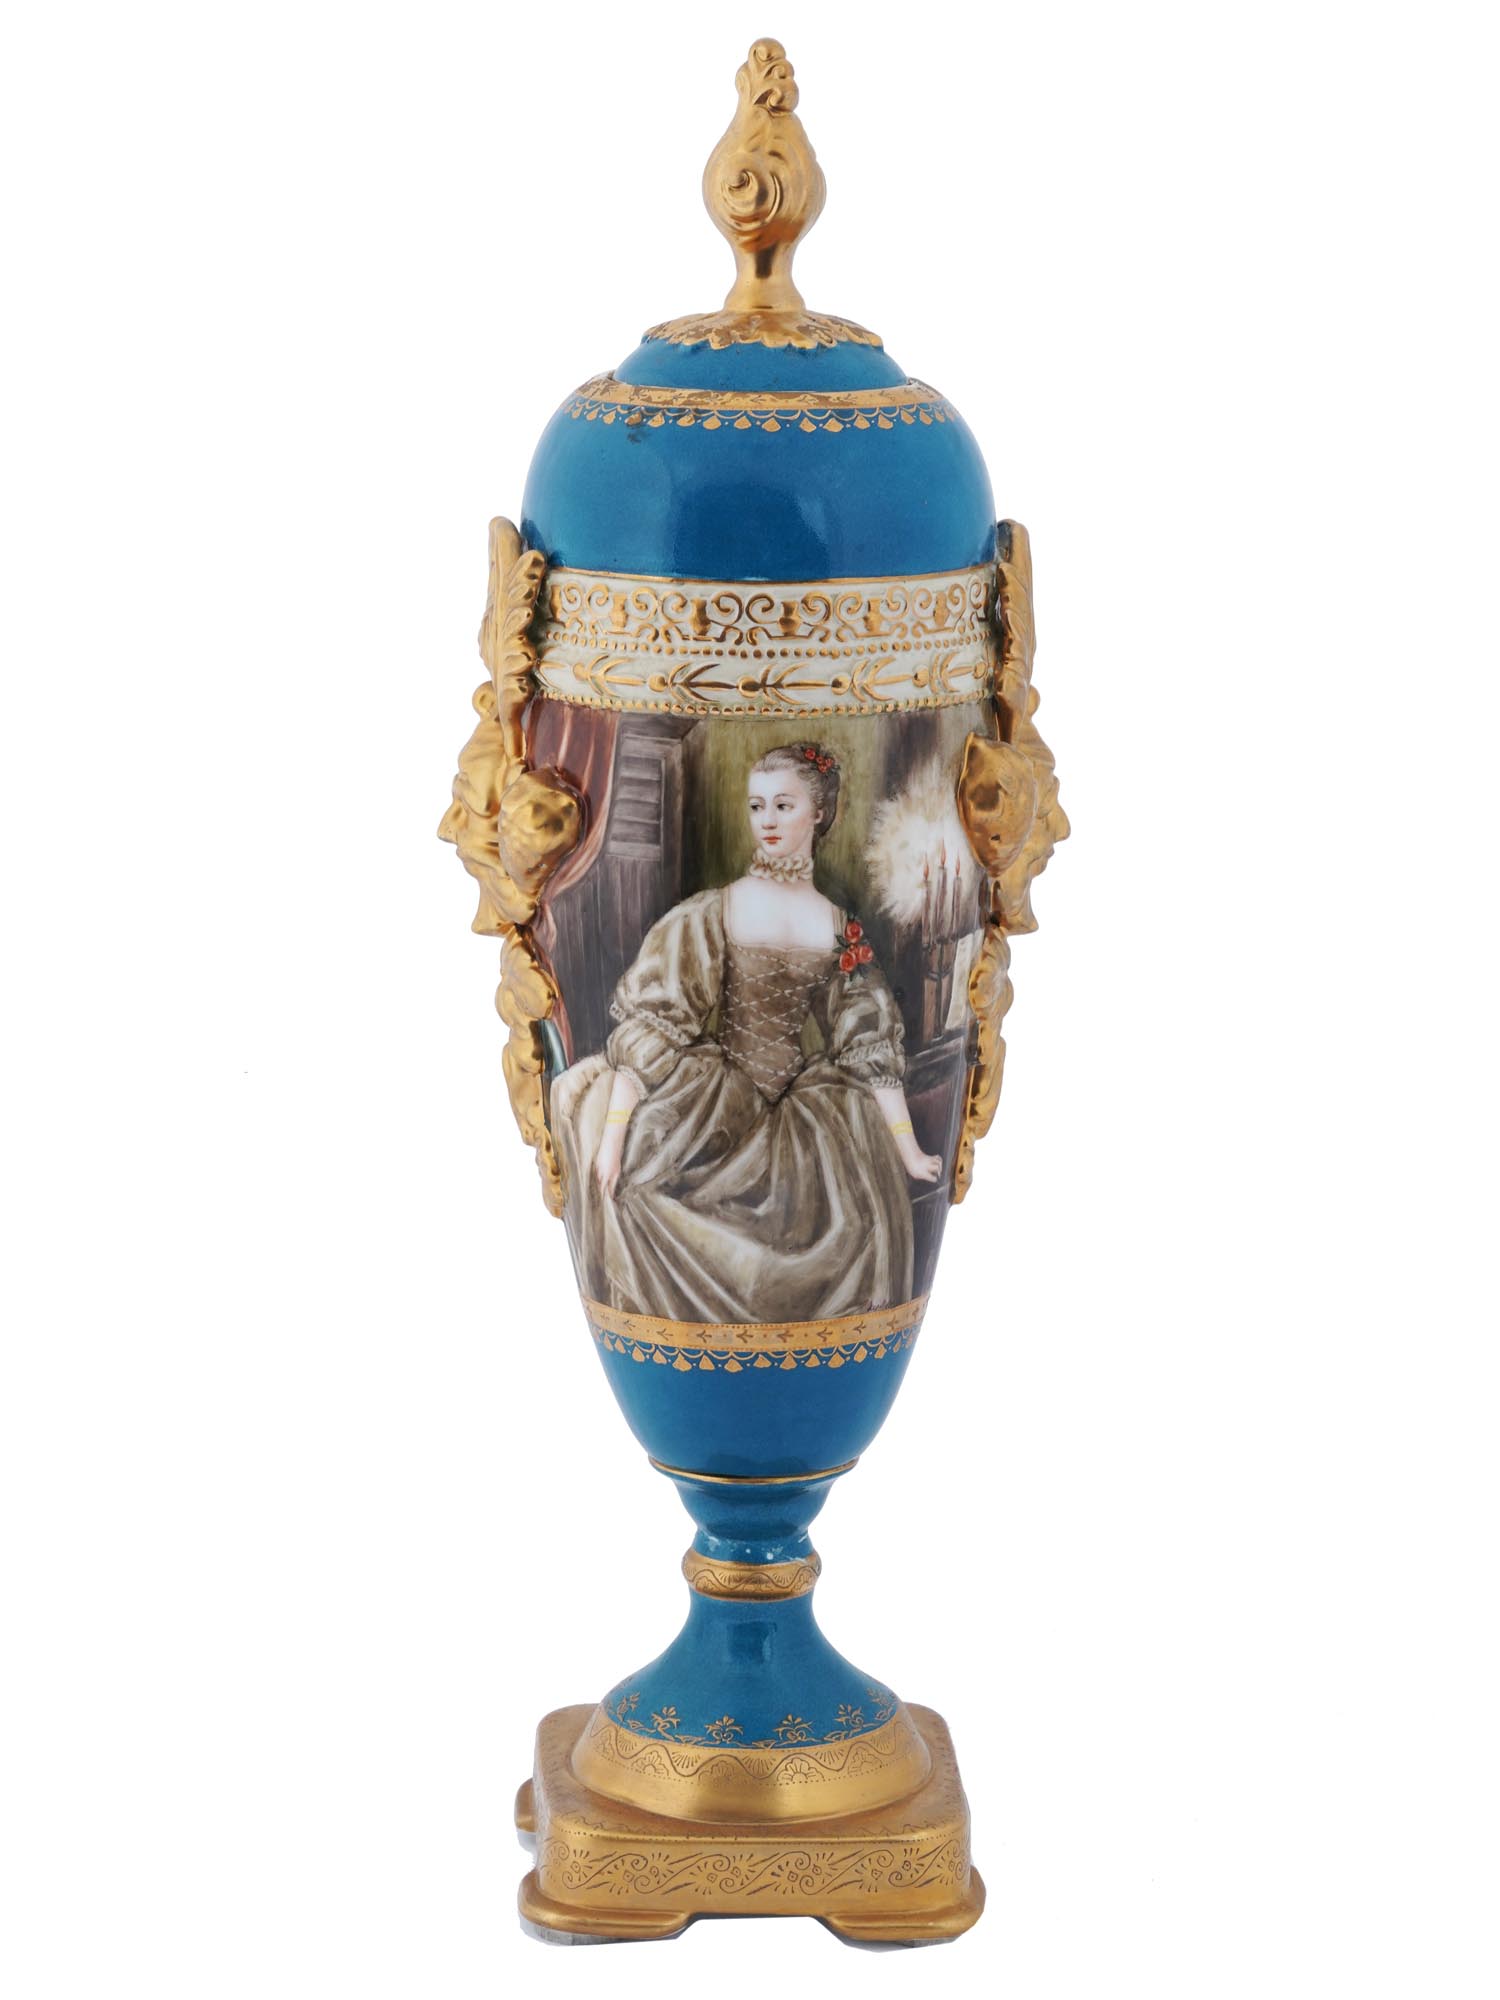 TALL FRENCH STYLE PORTRAITS GILT PORCELAIN VASE PIC-0